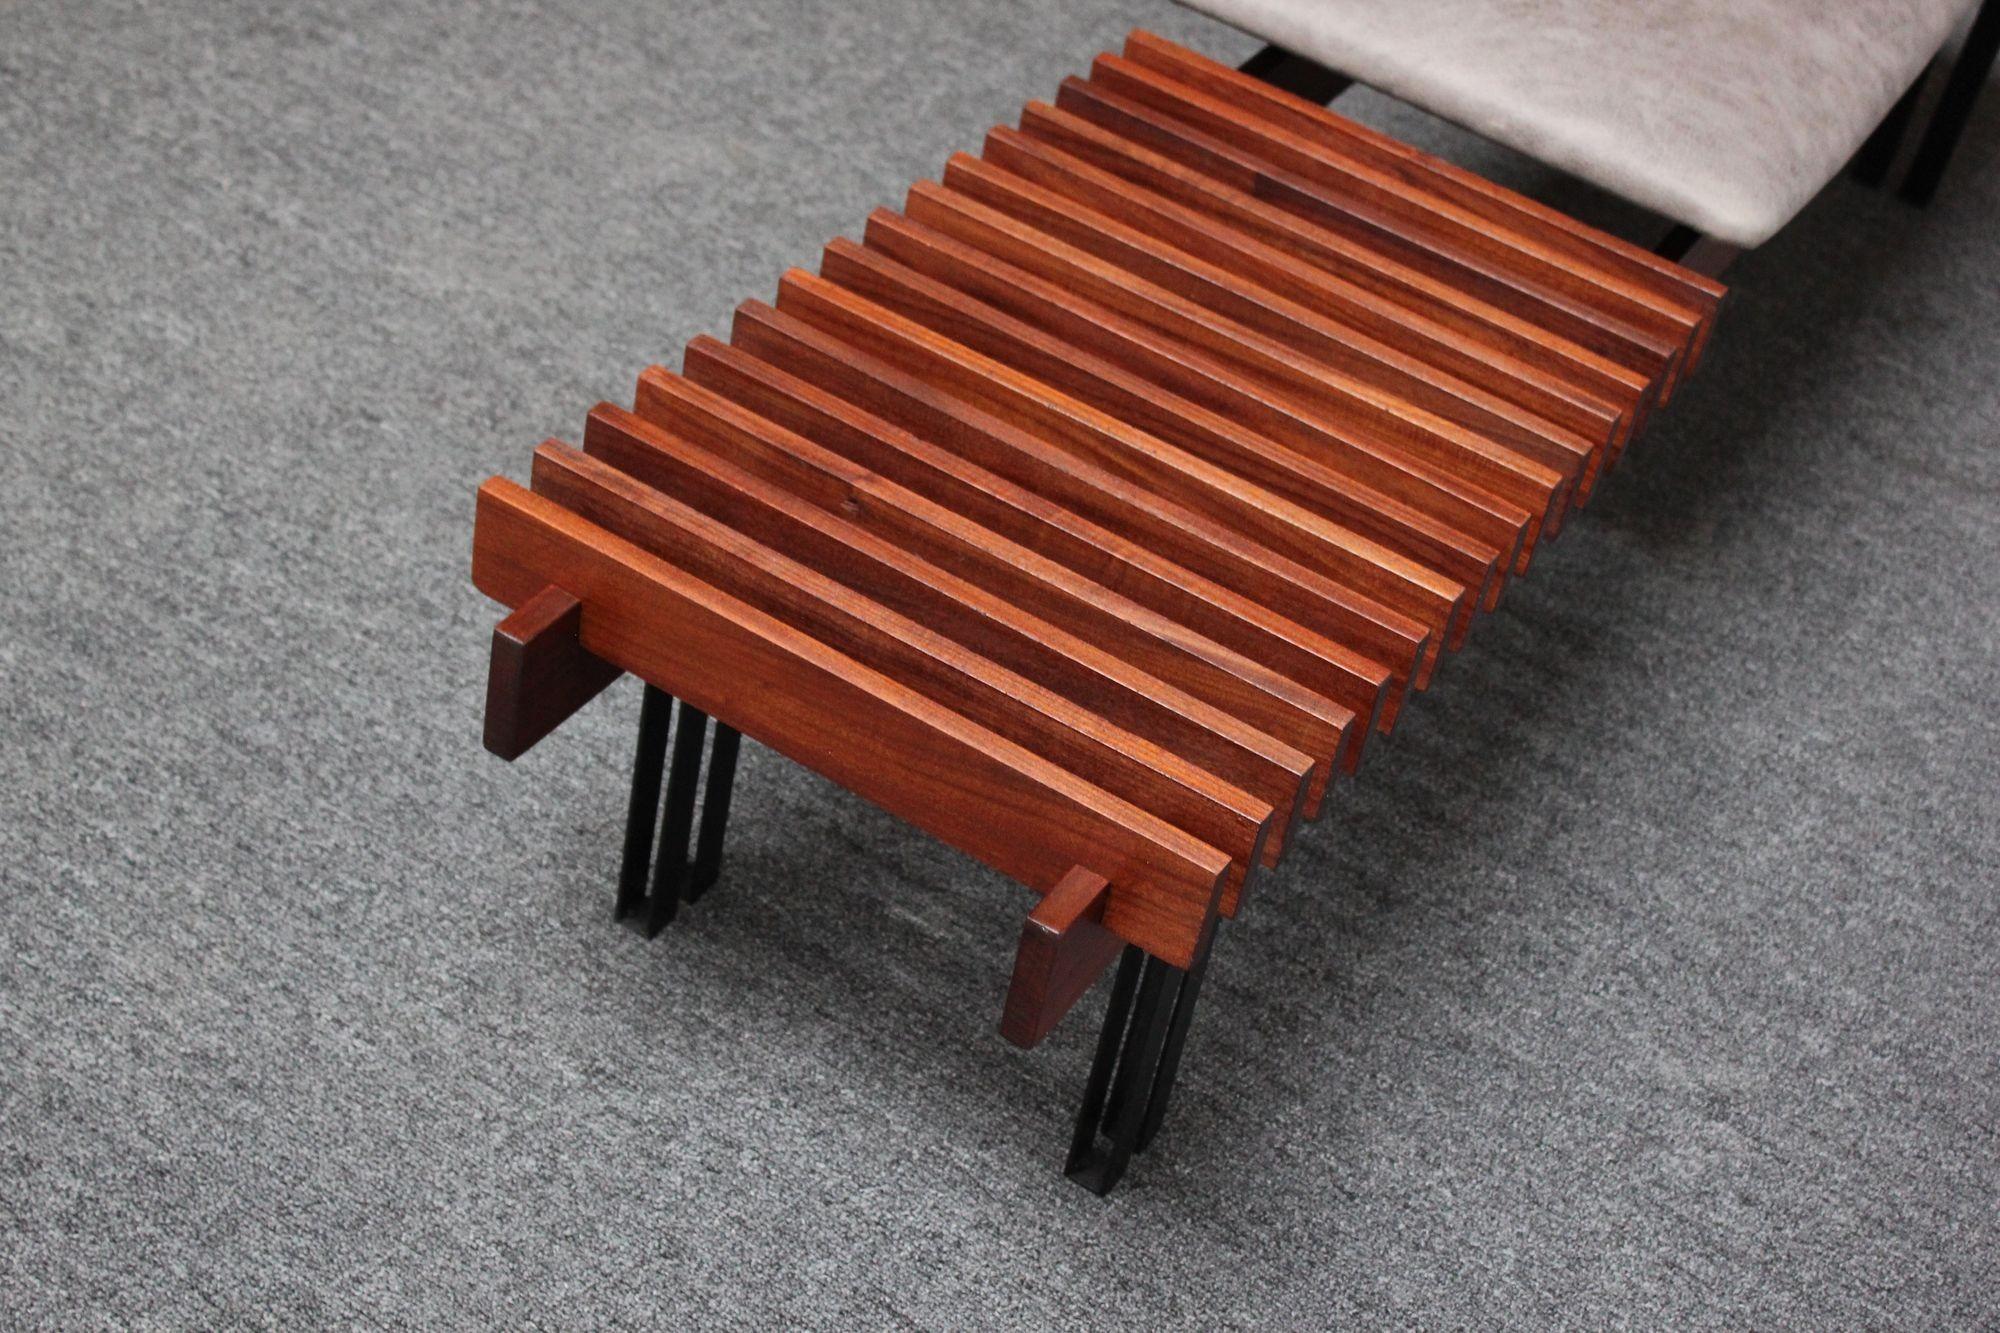 Italian Modernist Teak and Leather Bench by Inge and Luciano Rubino For Sale 6